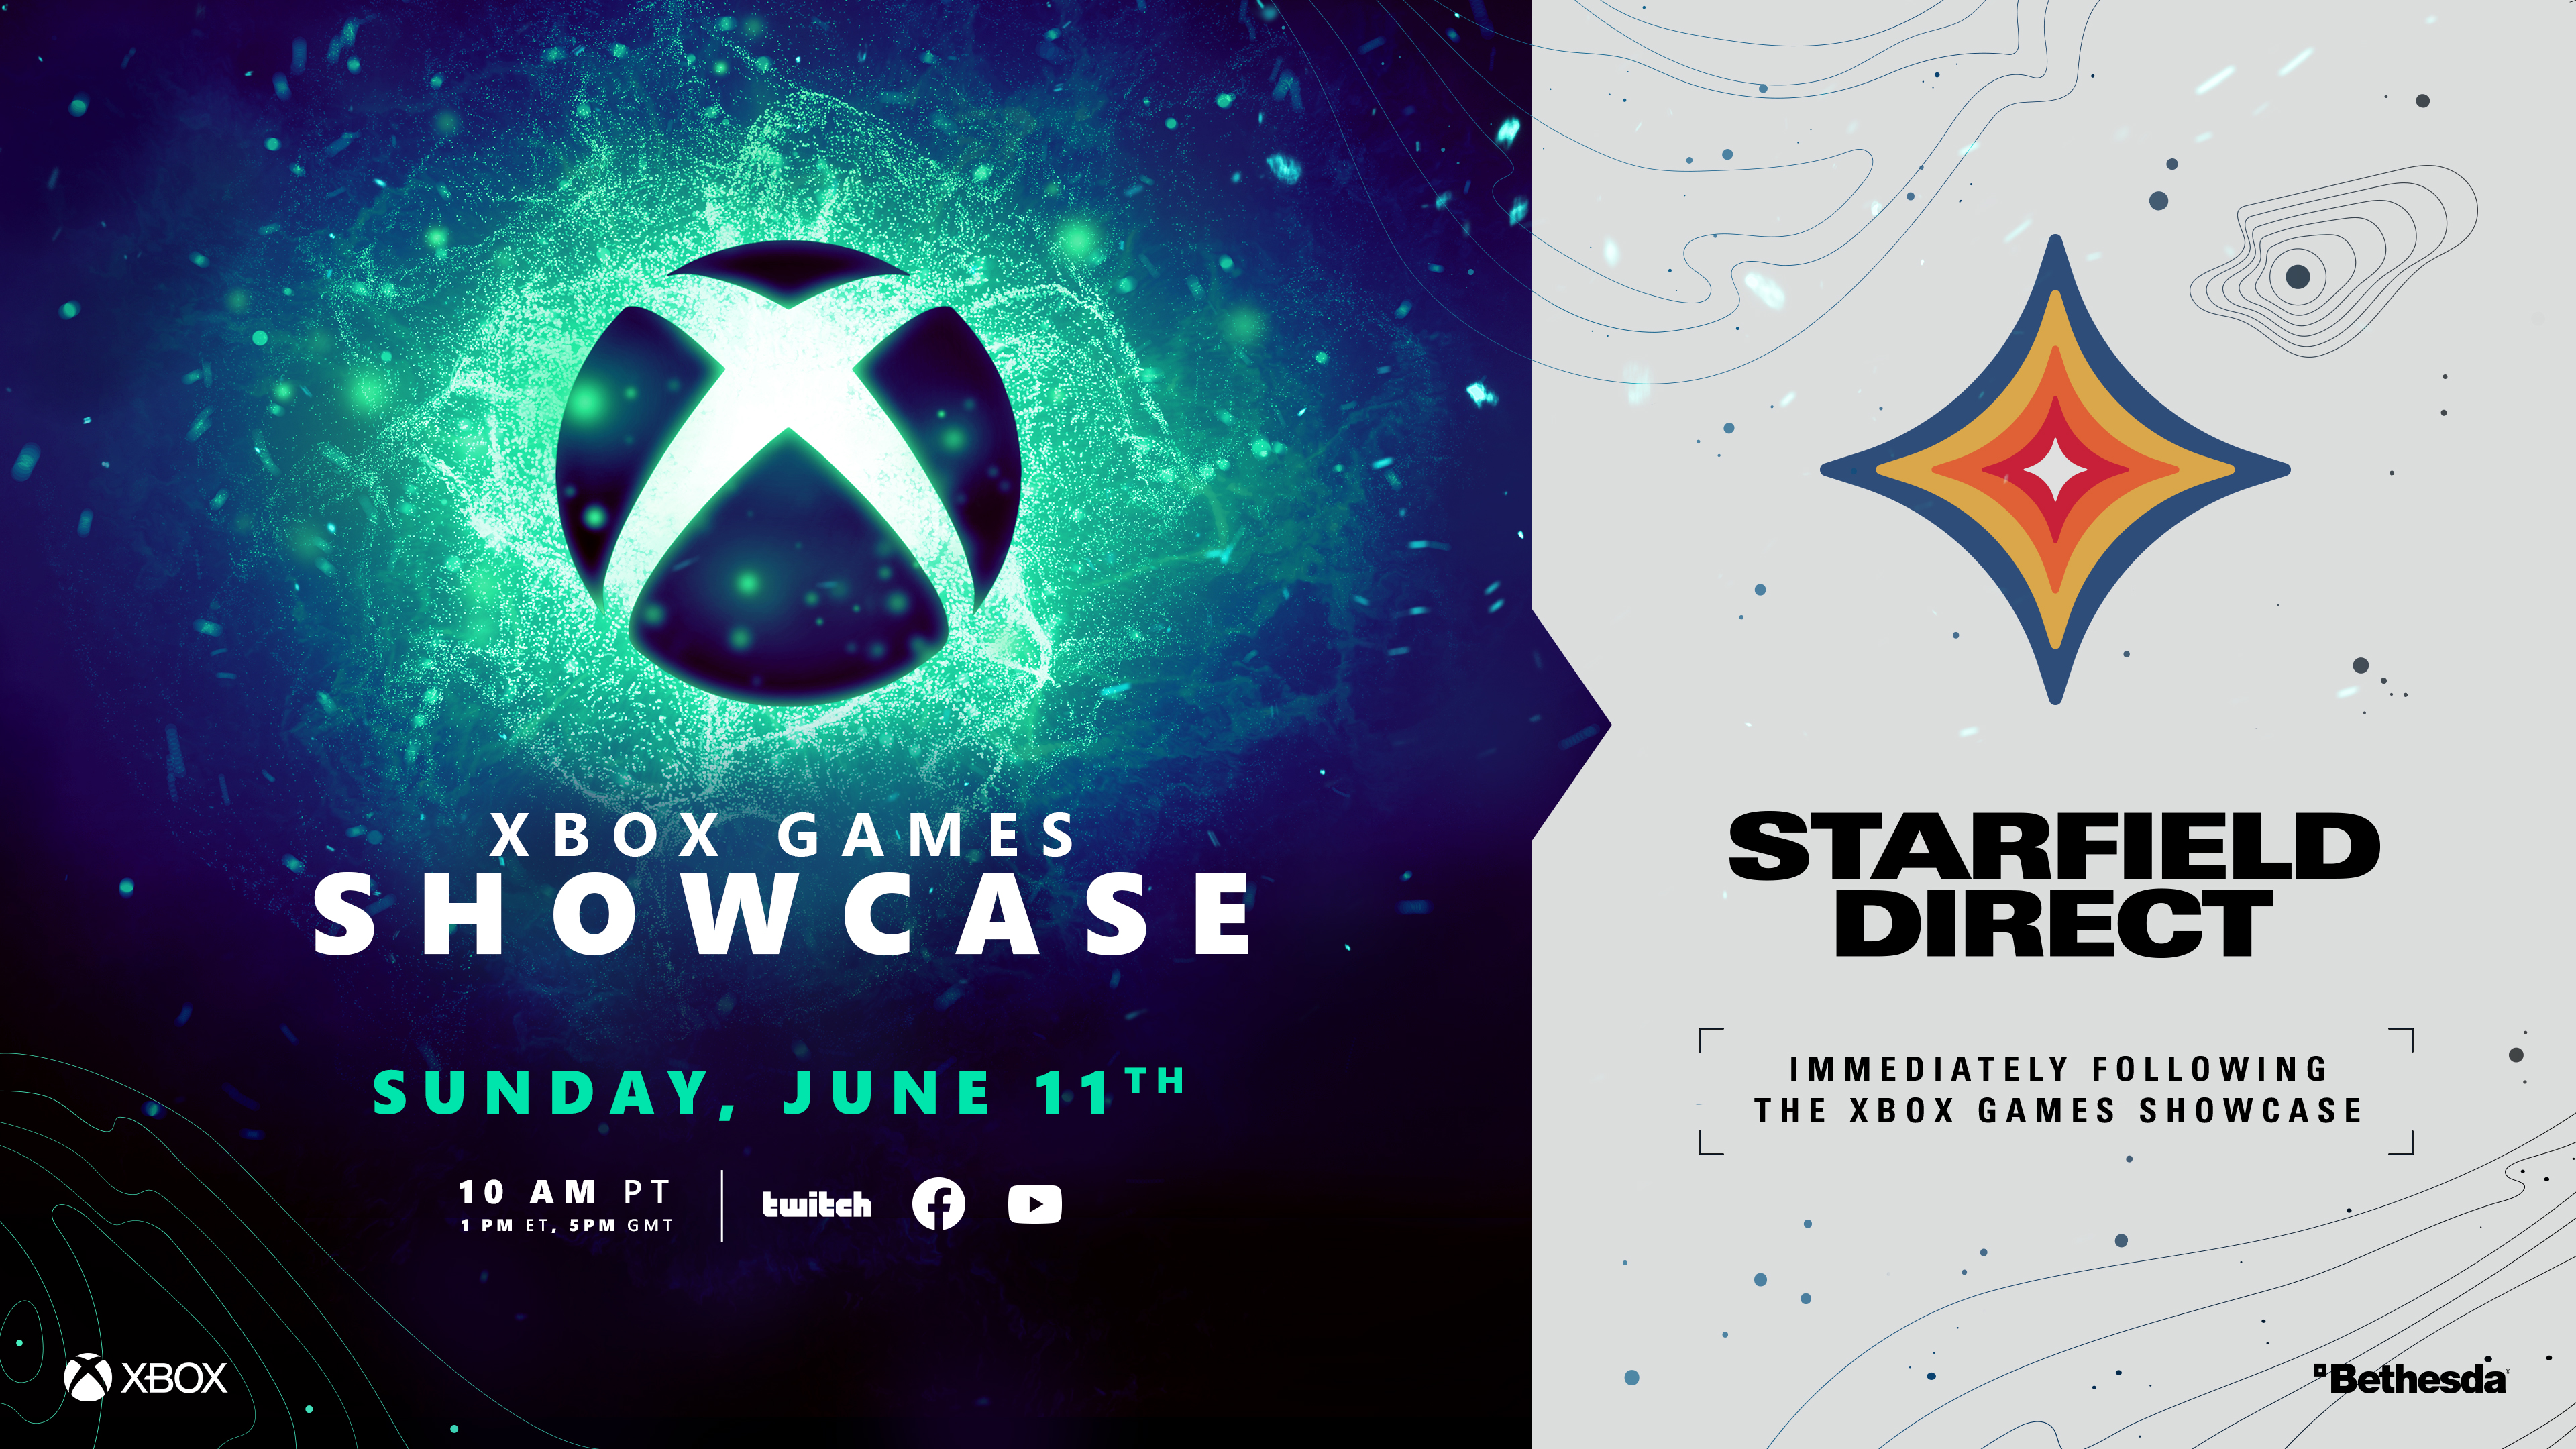 The key art for the Xbox Games Showcase and Starfield Direct is shown. Text on the left side reads: "Xbox Games Showcase. Sunday, June 11th. 10am PT. 1pm ET. 5pm GMT. Twitch, Facebook, YouTube." The right side reads: "Starfield Direct. Immediately following the Xbox Games Showcase."